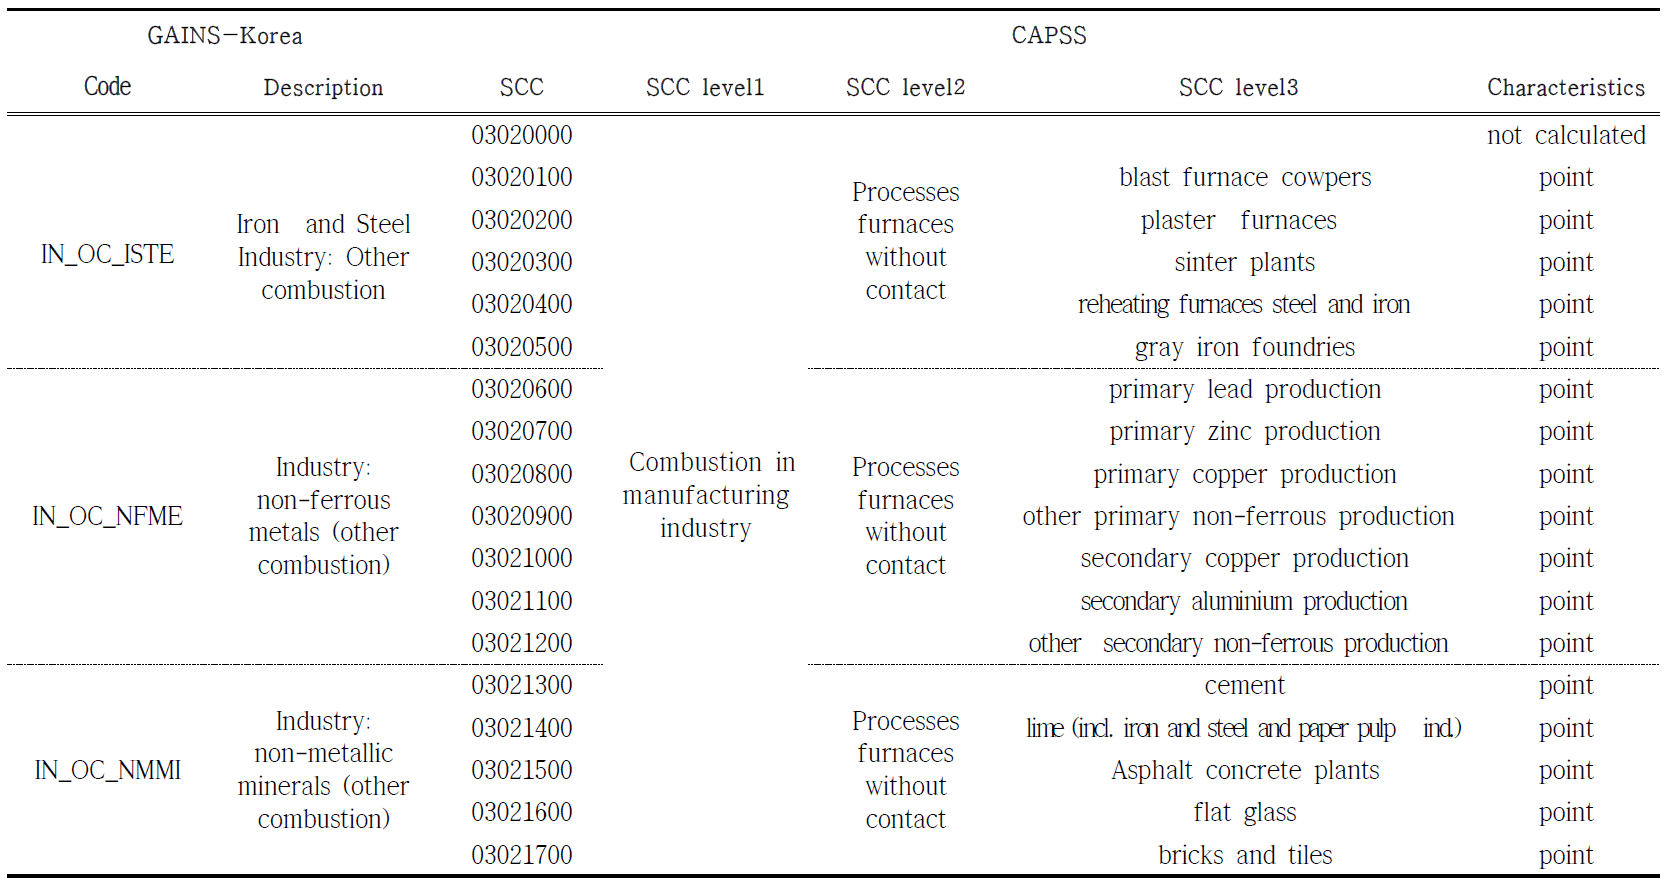 Example of mapping table of source and fuel classification between CAPSS and GAINS systems for Industry sector.